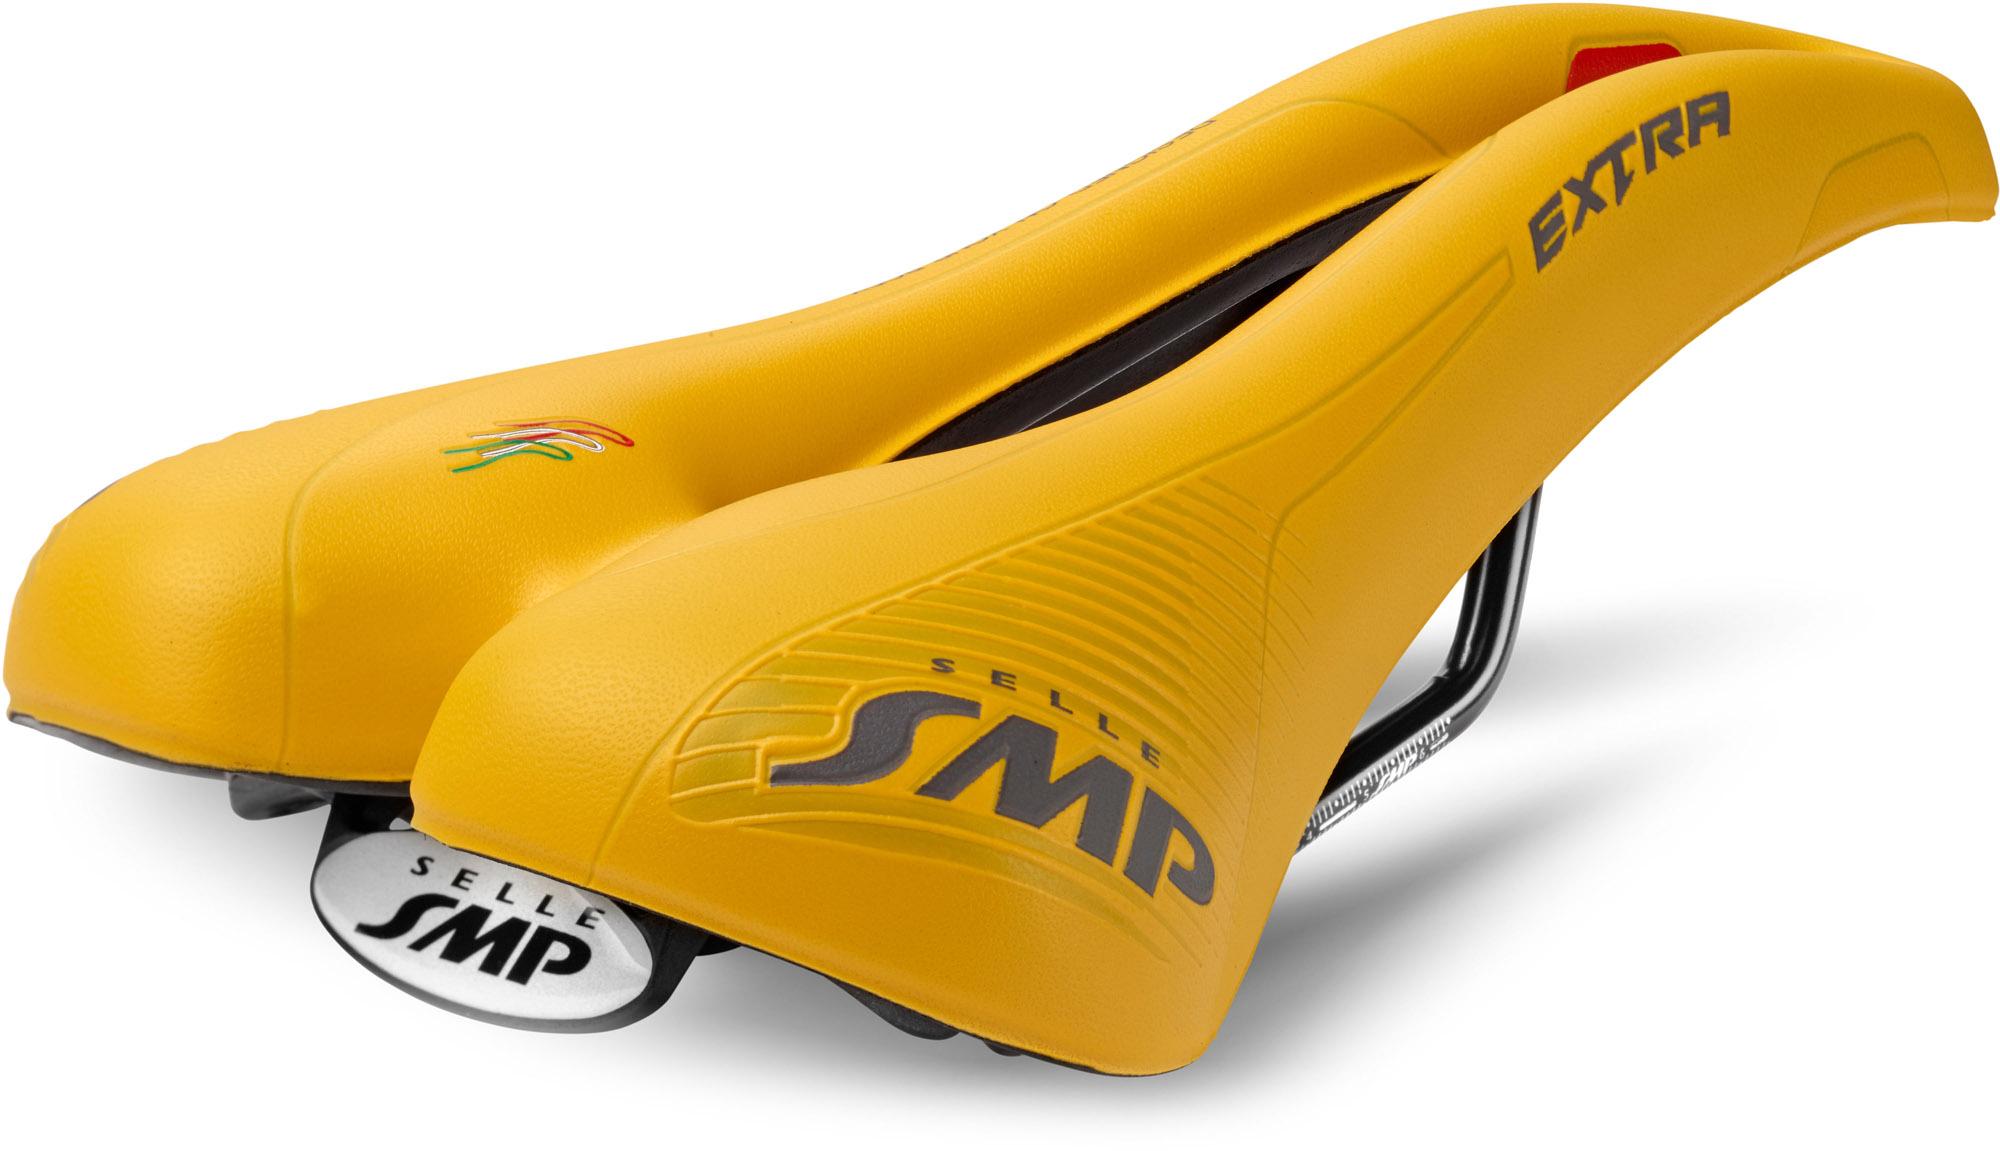 Selle Smp Extra Road Bike Saddle  Yellow